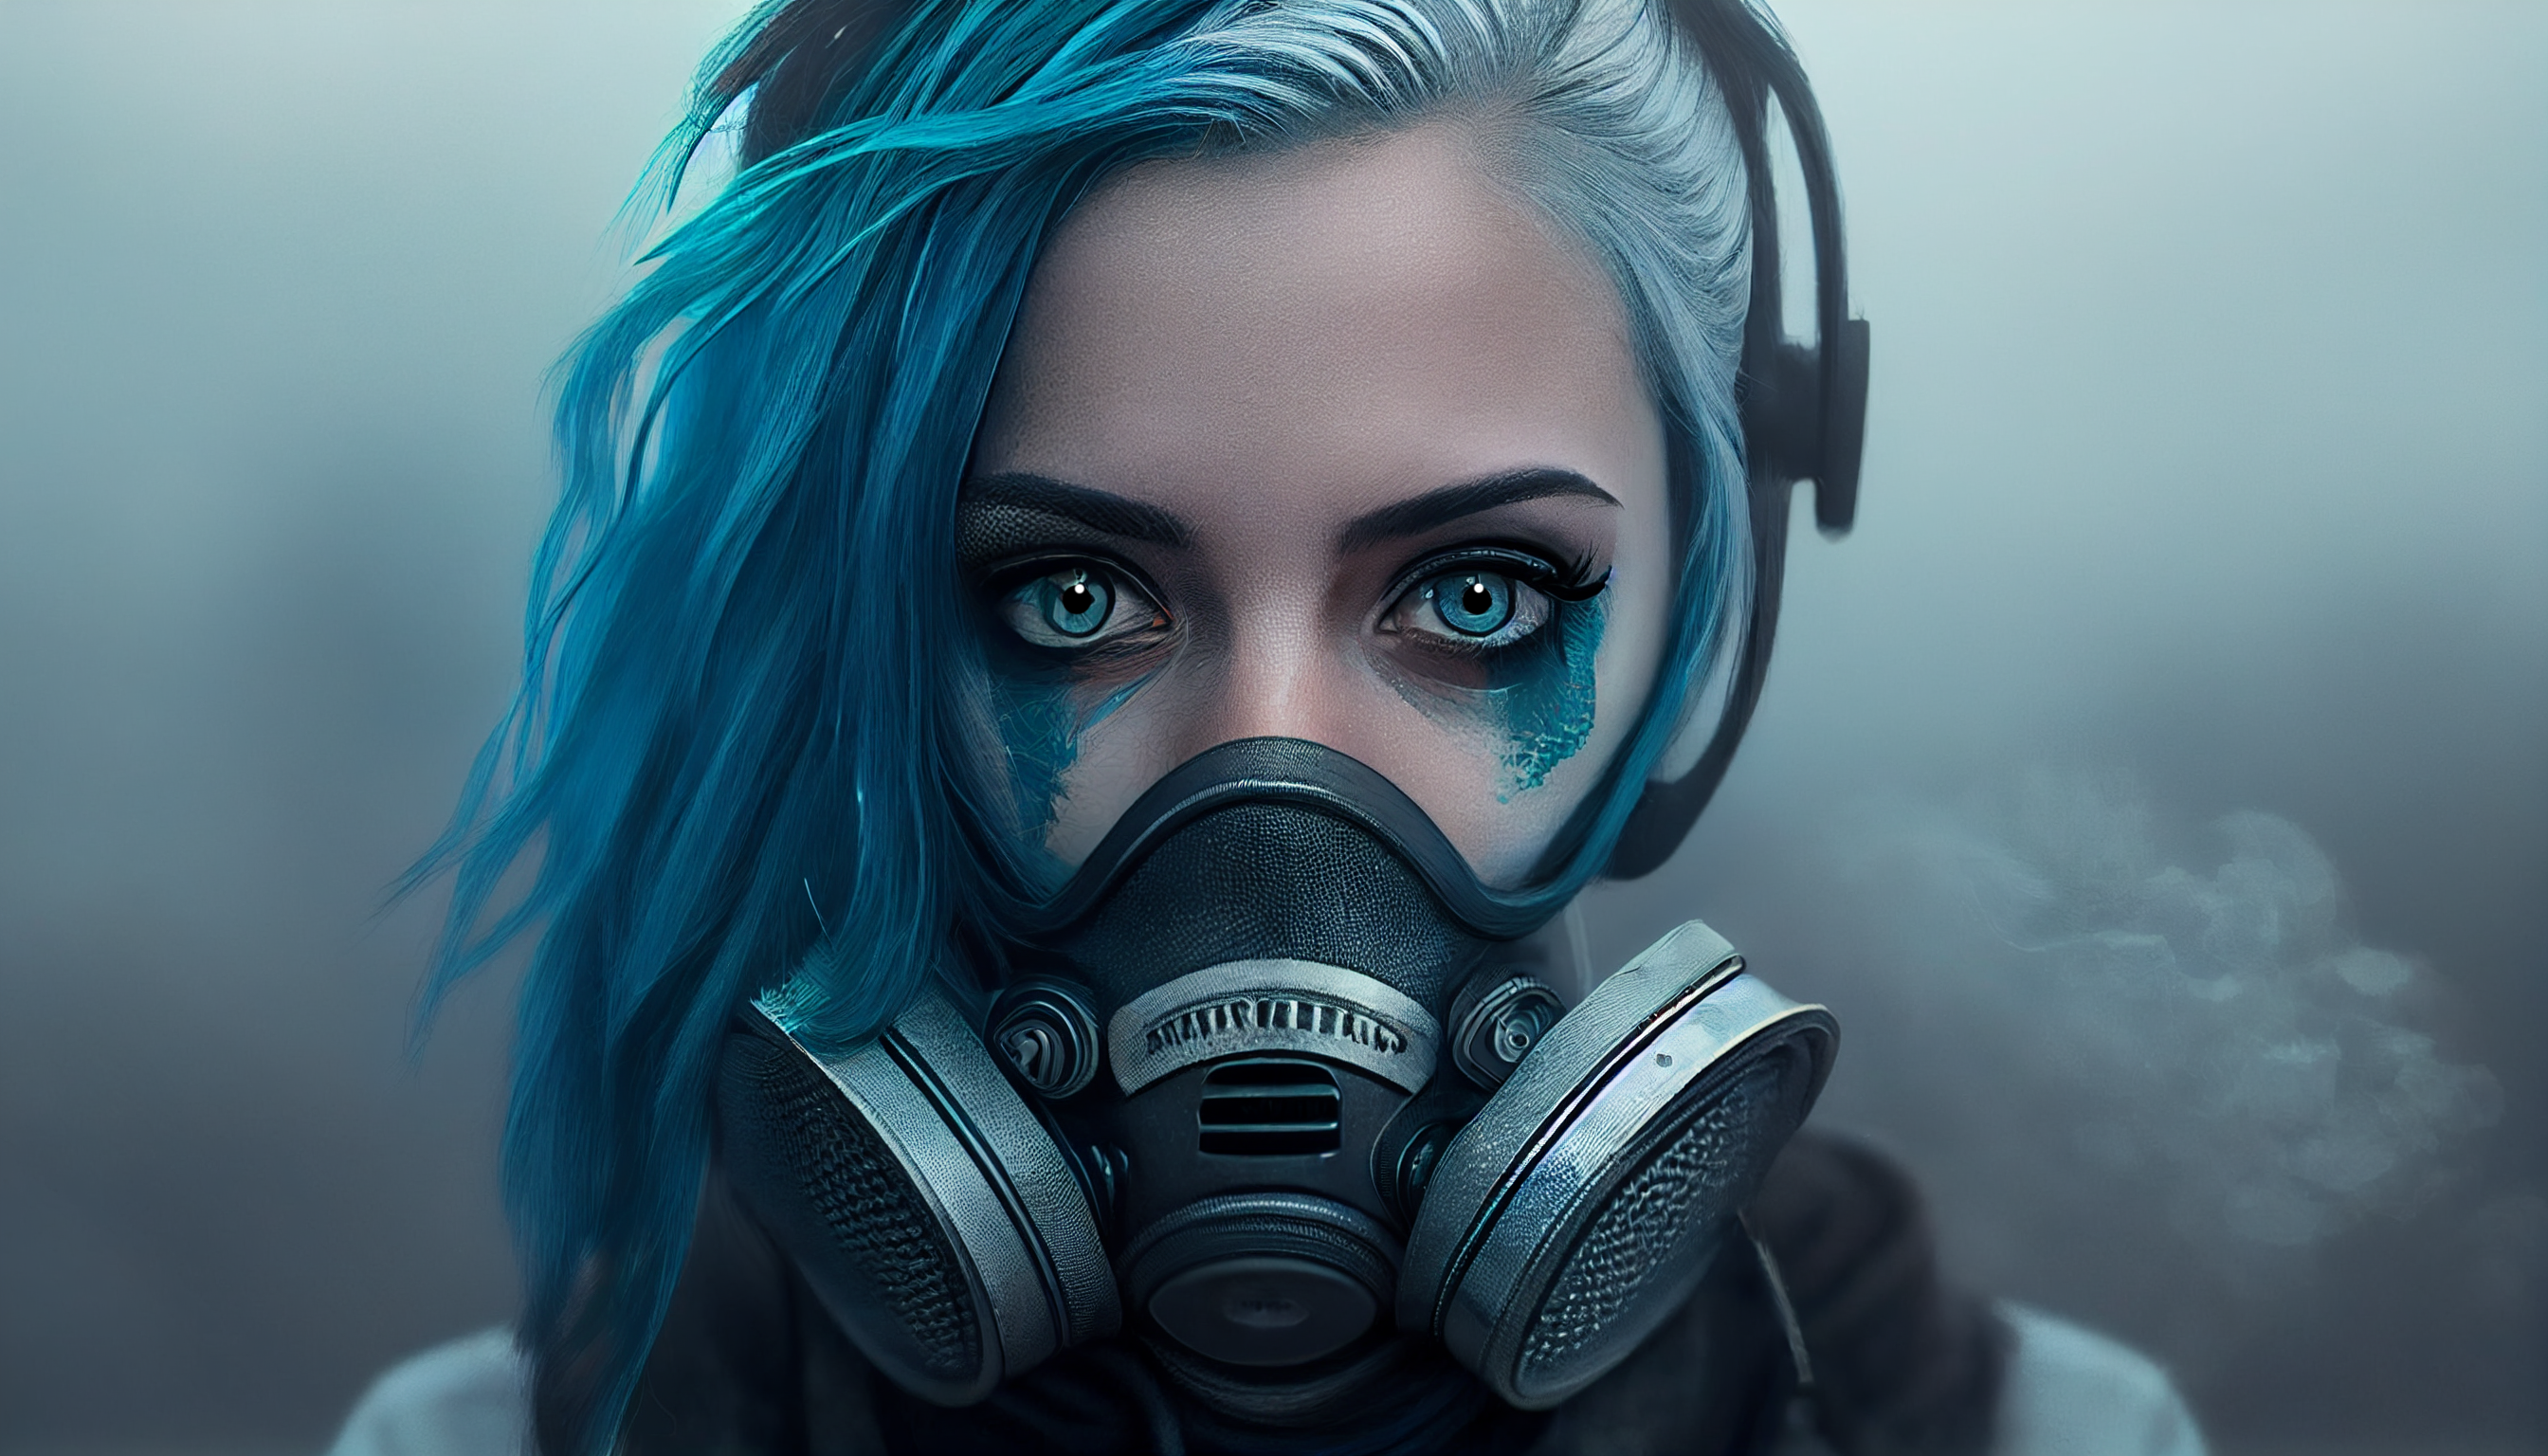 Anonymous Hacker Face Mask Themes  Wallpapers Apk Download for Android  Latest version 10 comstylishthemehdwallpaper launcheranonymoushackermask